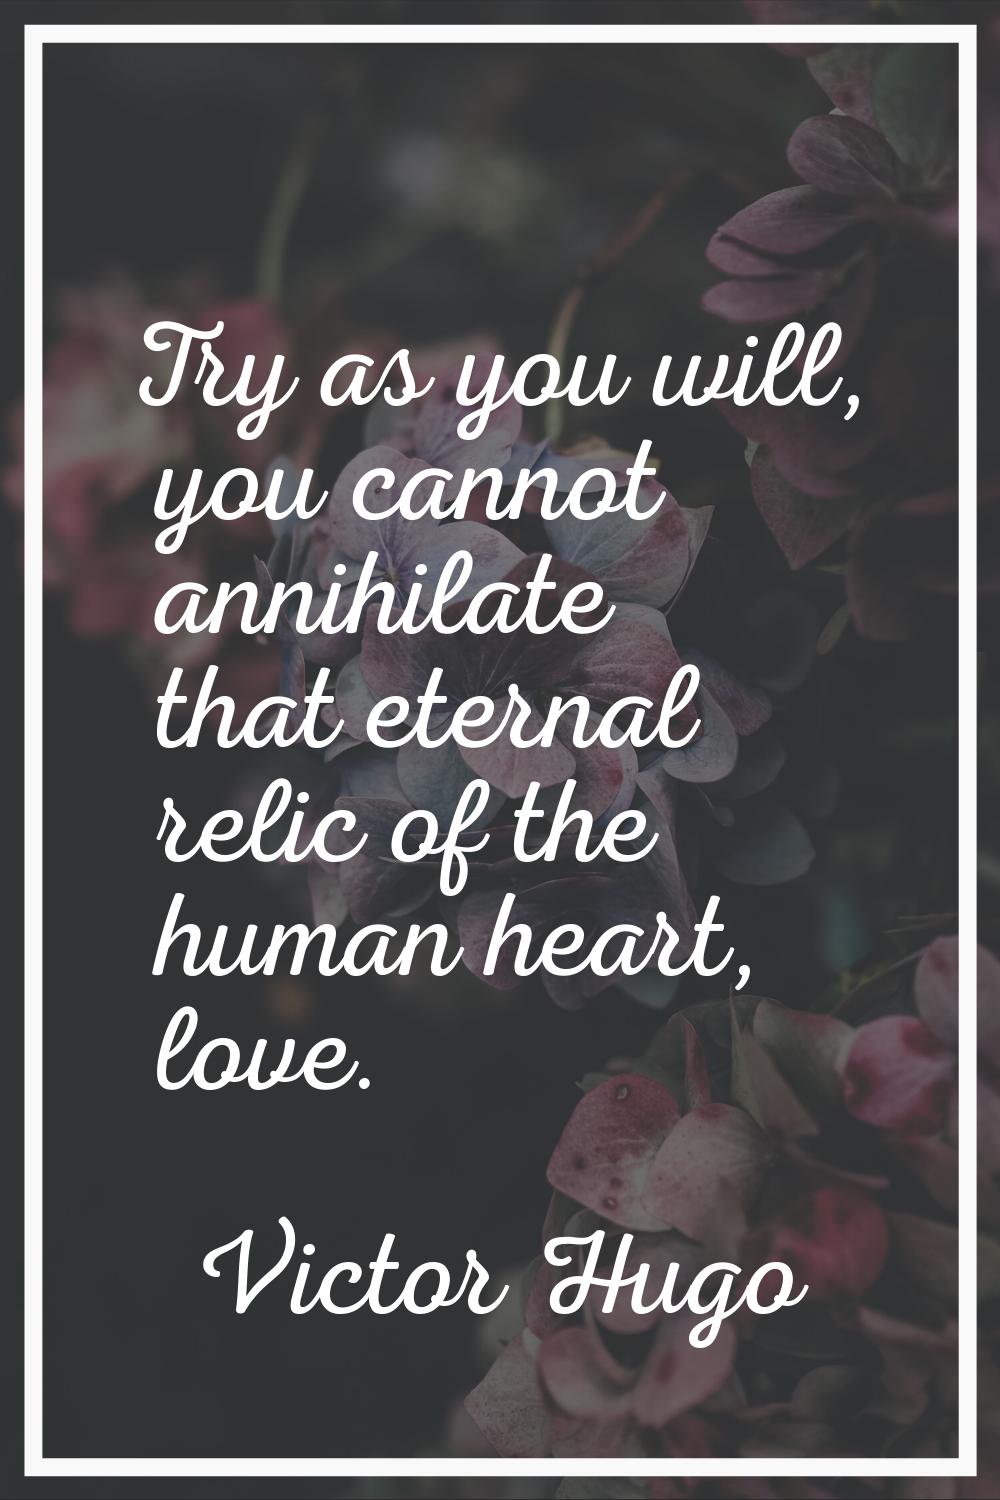 Try as you will, you cannot annihilate that eternal relic of the human heart, love.